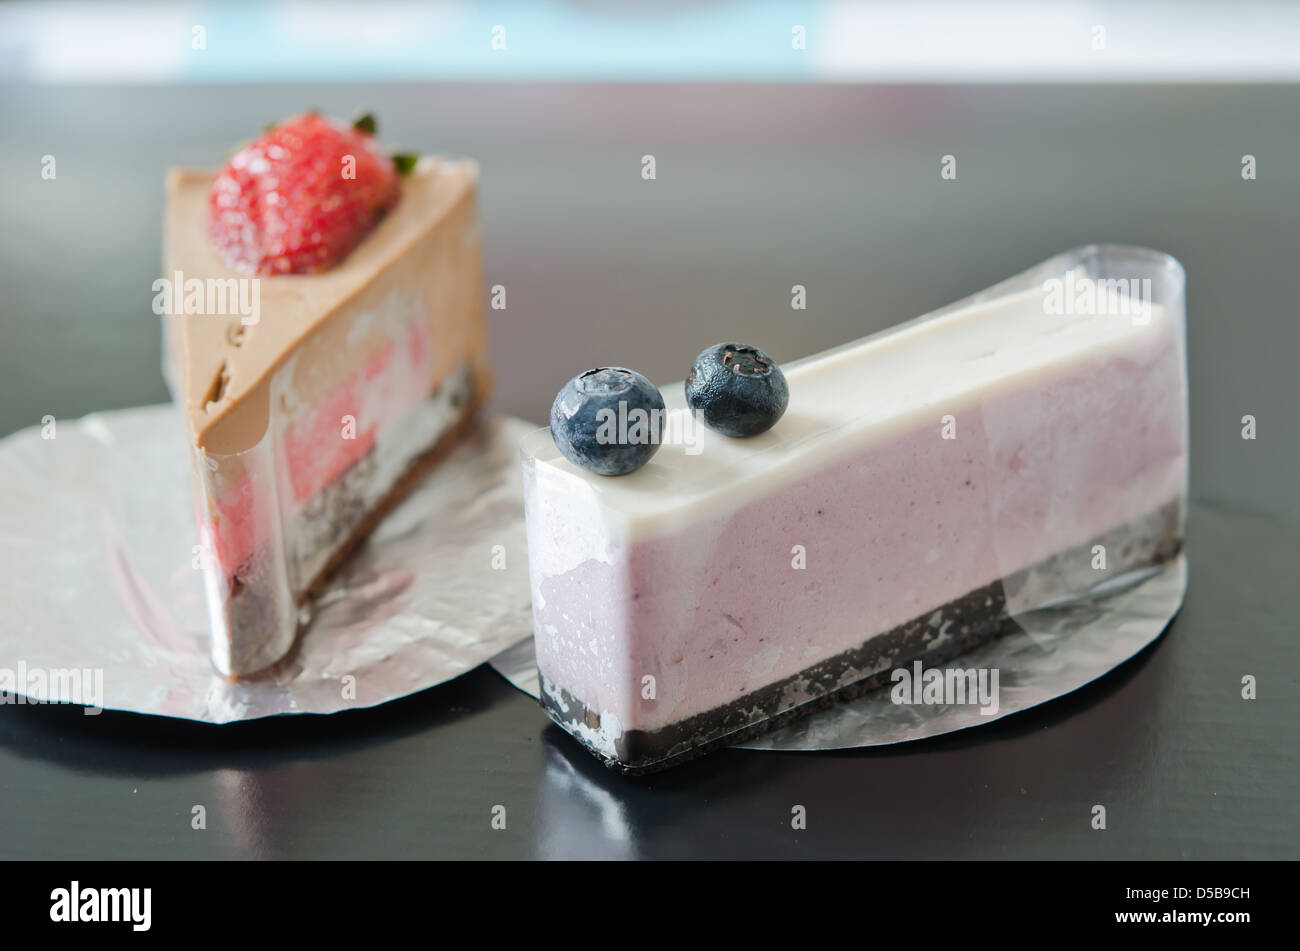 blueberries cheesecake and strawberry cheesecake , delicious and sweet Stock Photo